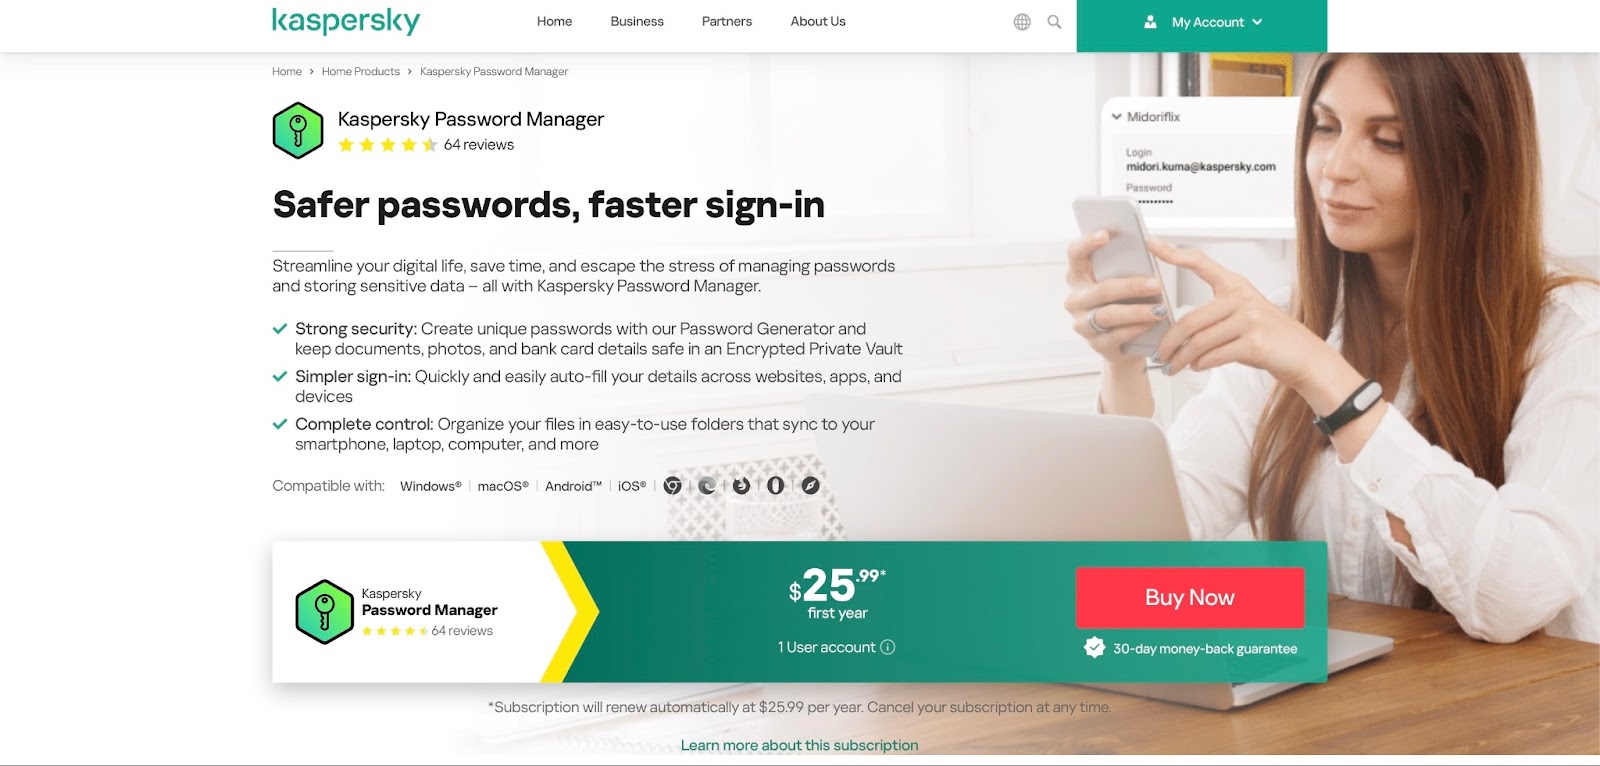 Home page of the Kaspersky website